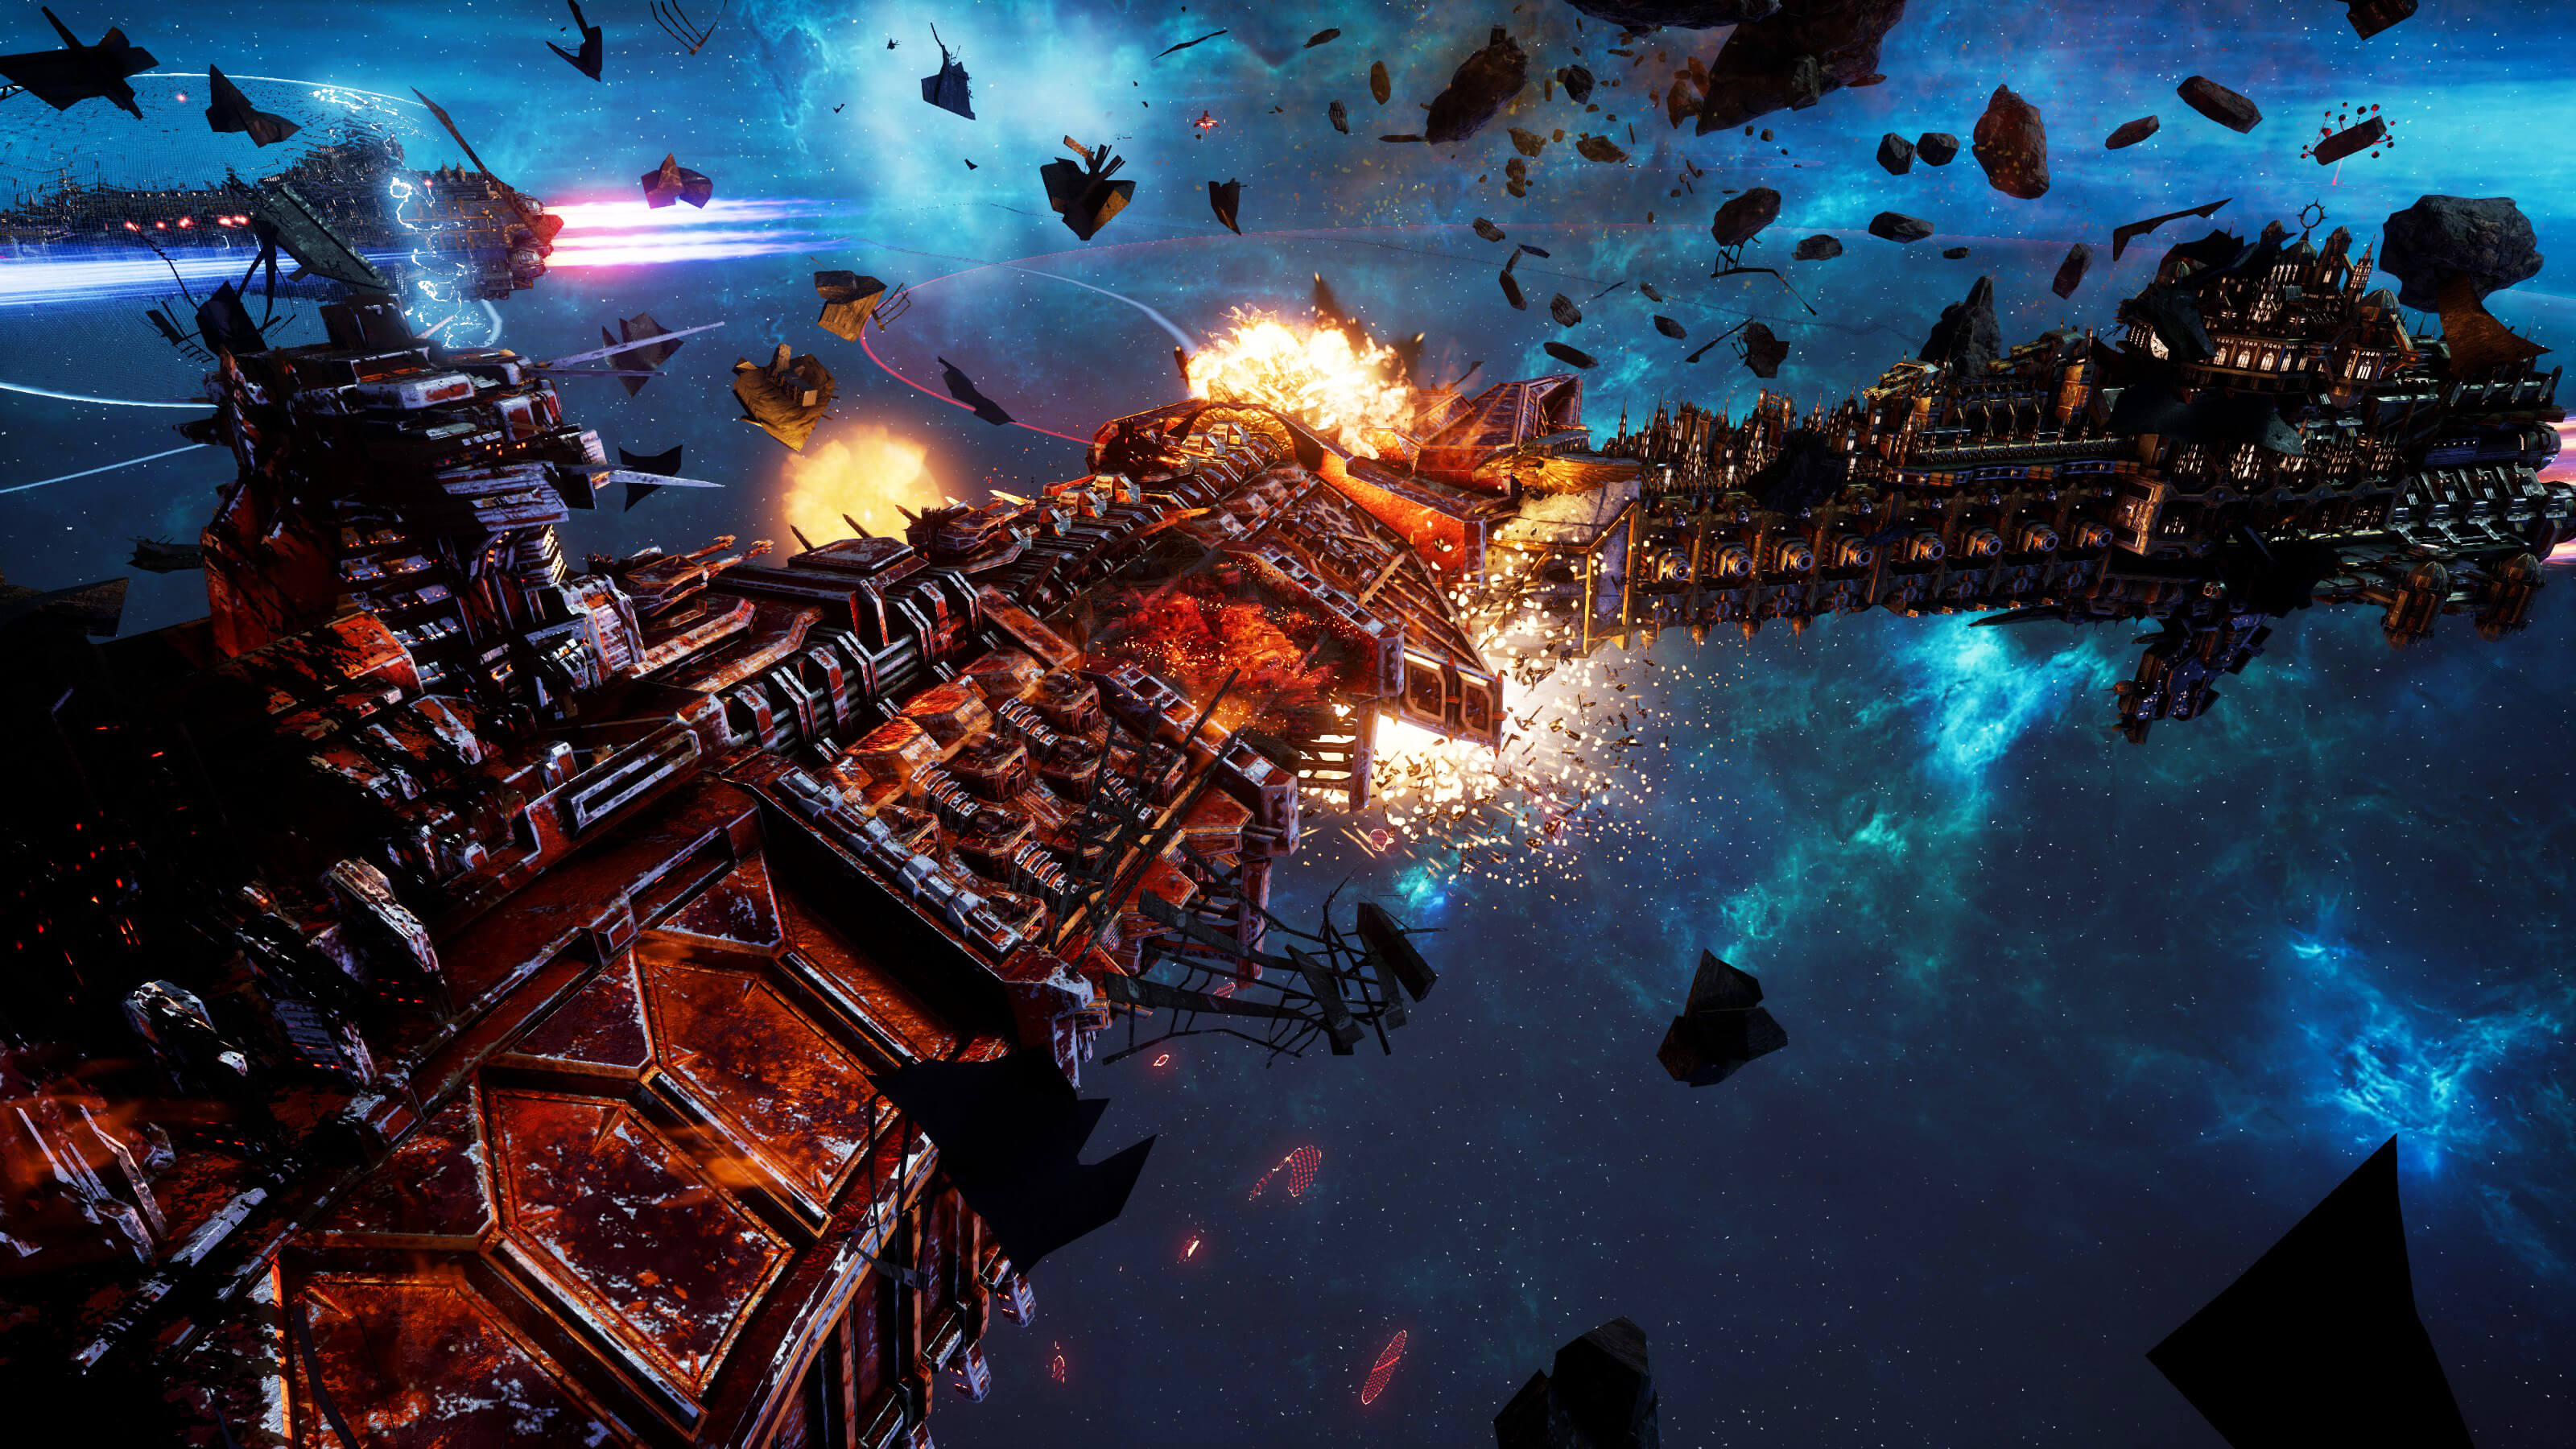 Victory Or Death - Battlefleet Gothic Armada 2 , HD Wallpaper & Backgrounds